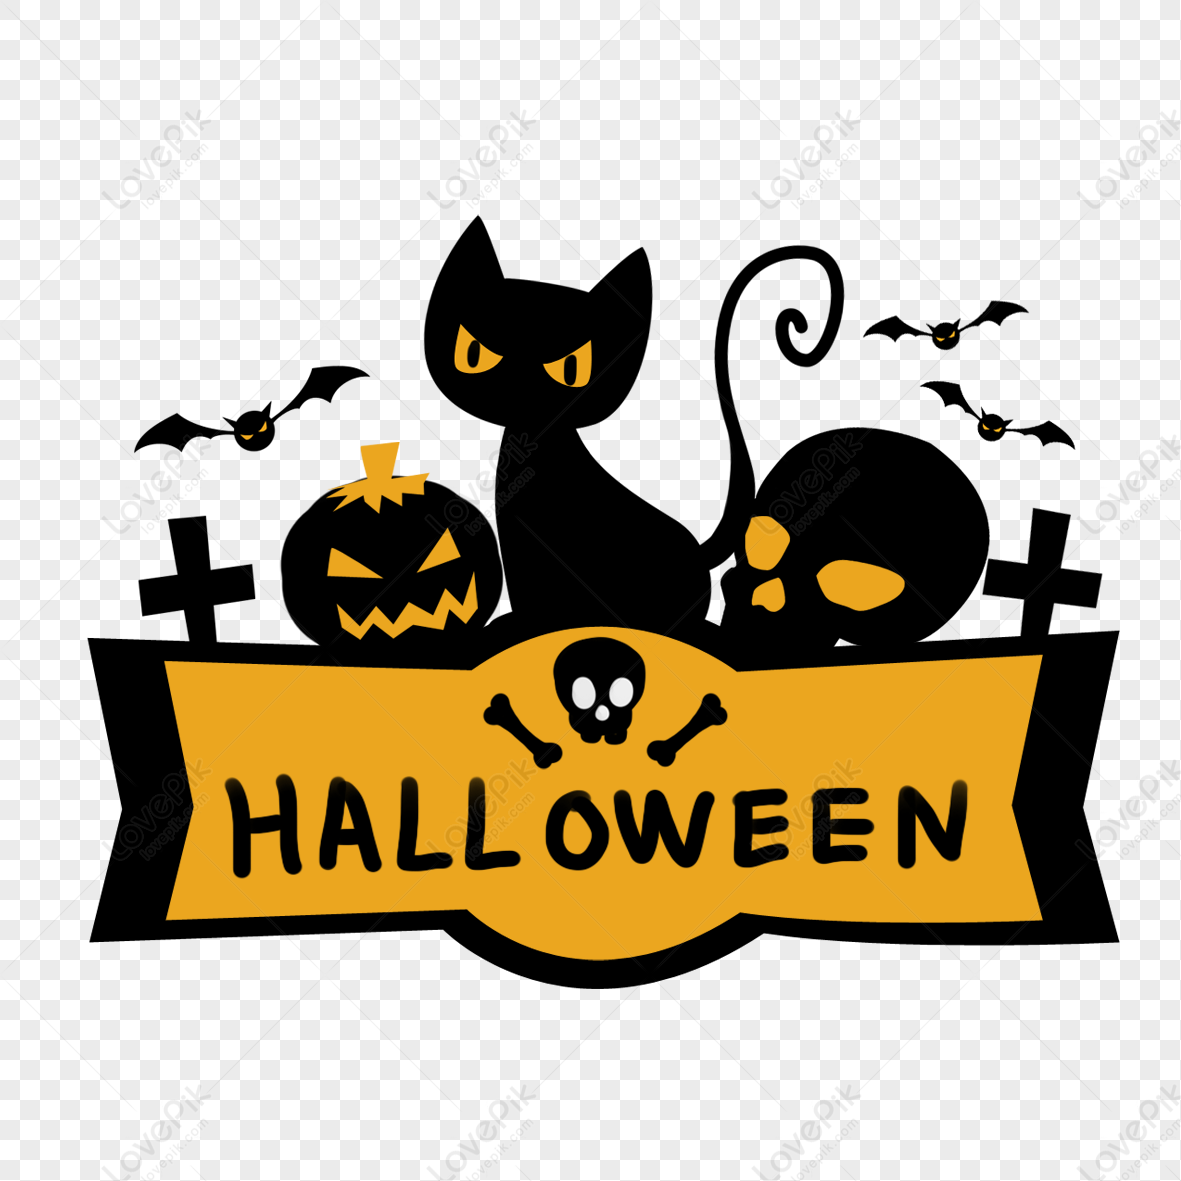 Halloween Decorations PNG Transparent Background And Clipart Image ...